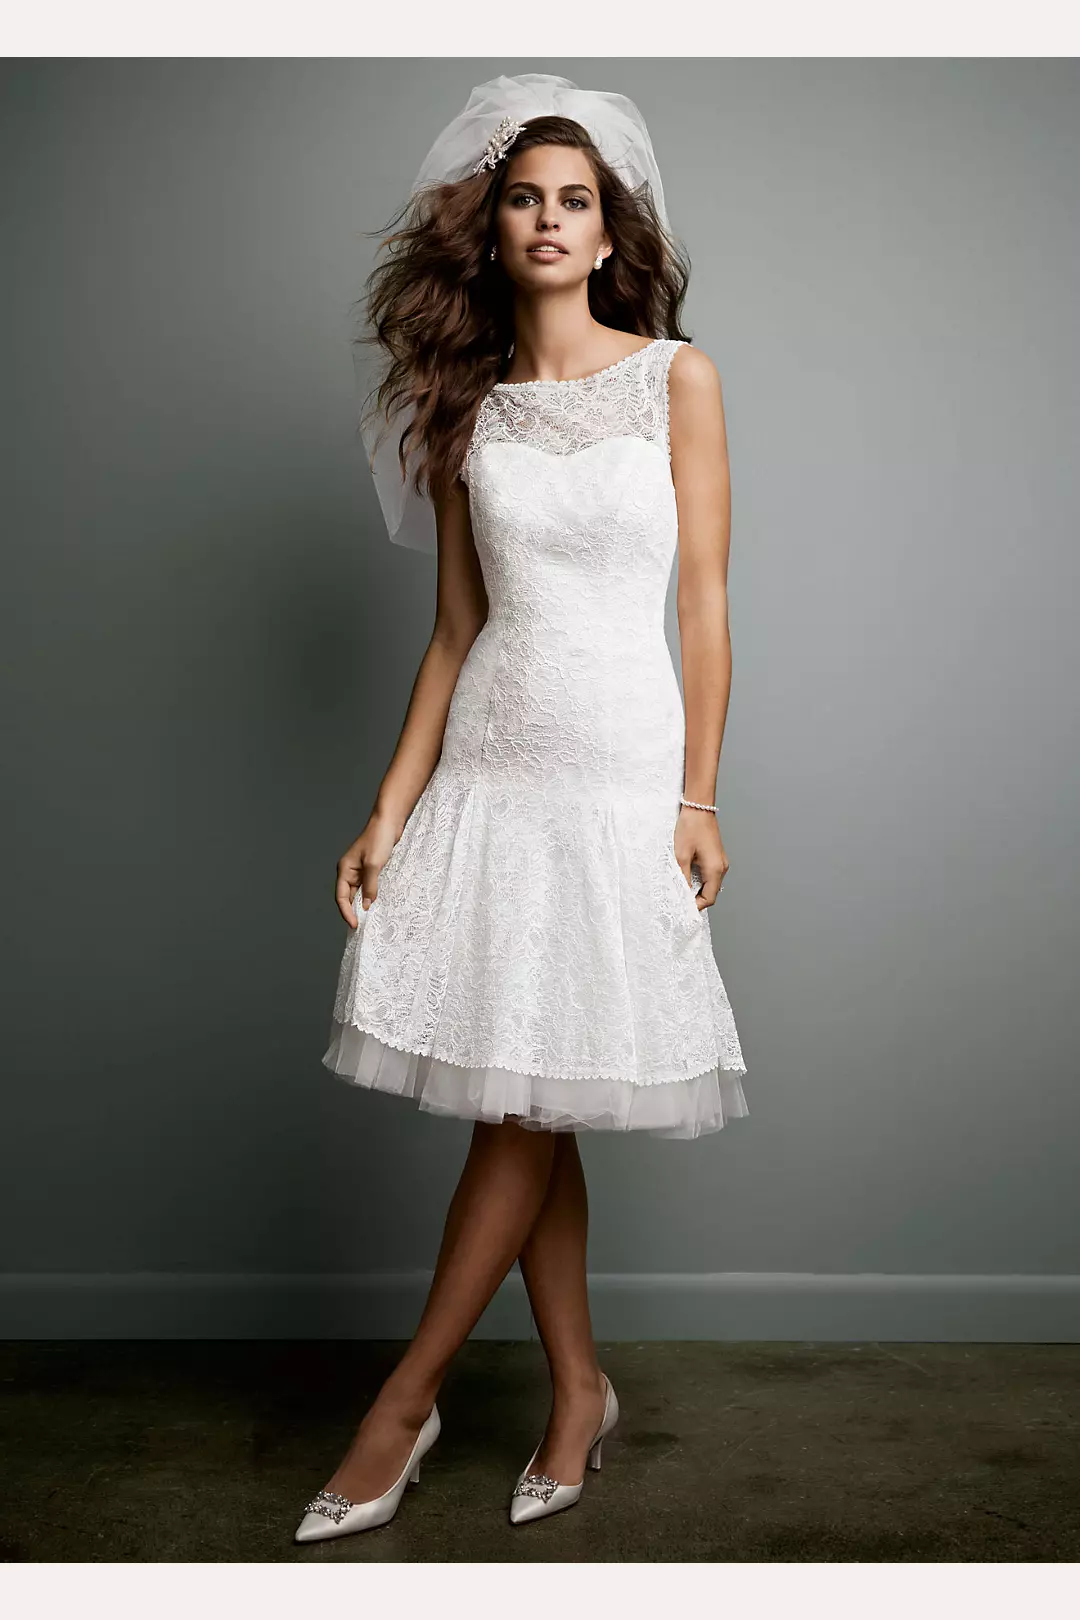 All Over Lace Short Dress with Illusion Neckline Image